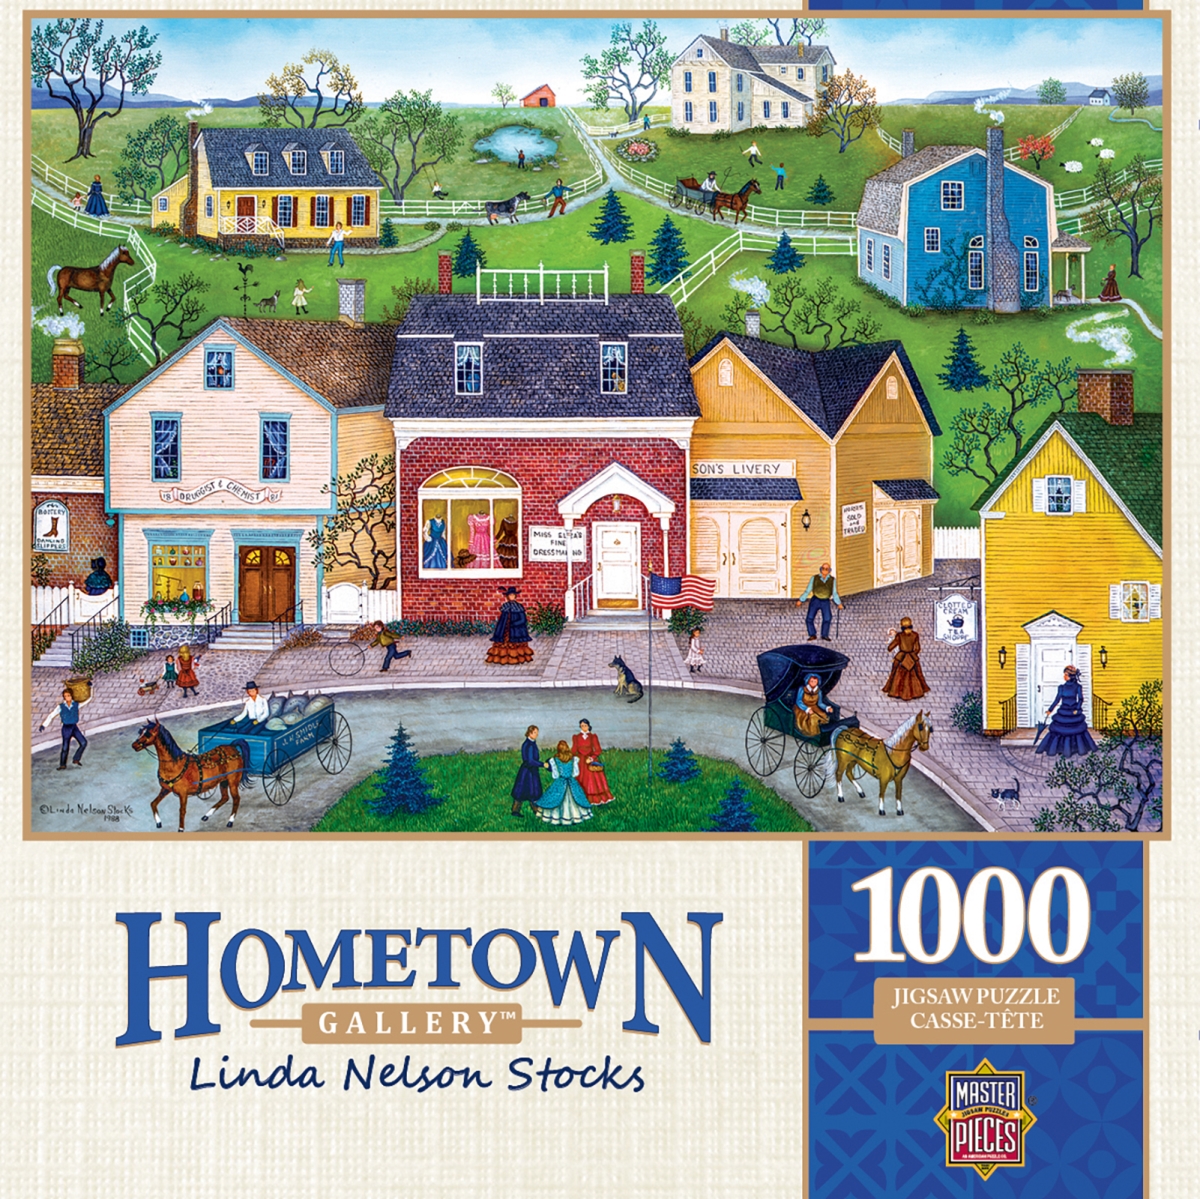 71934 19.25 X 26.75 In. Hometown Gallery The Dress Shop Jigsaw Puzzle - 1000 Piece